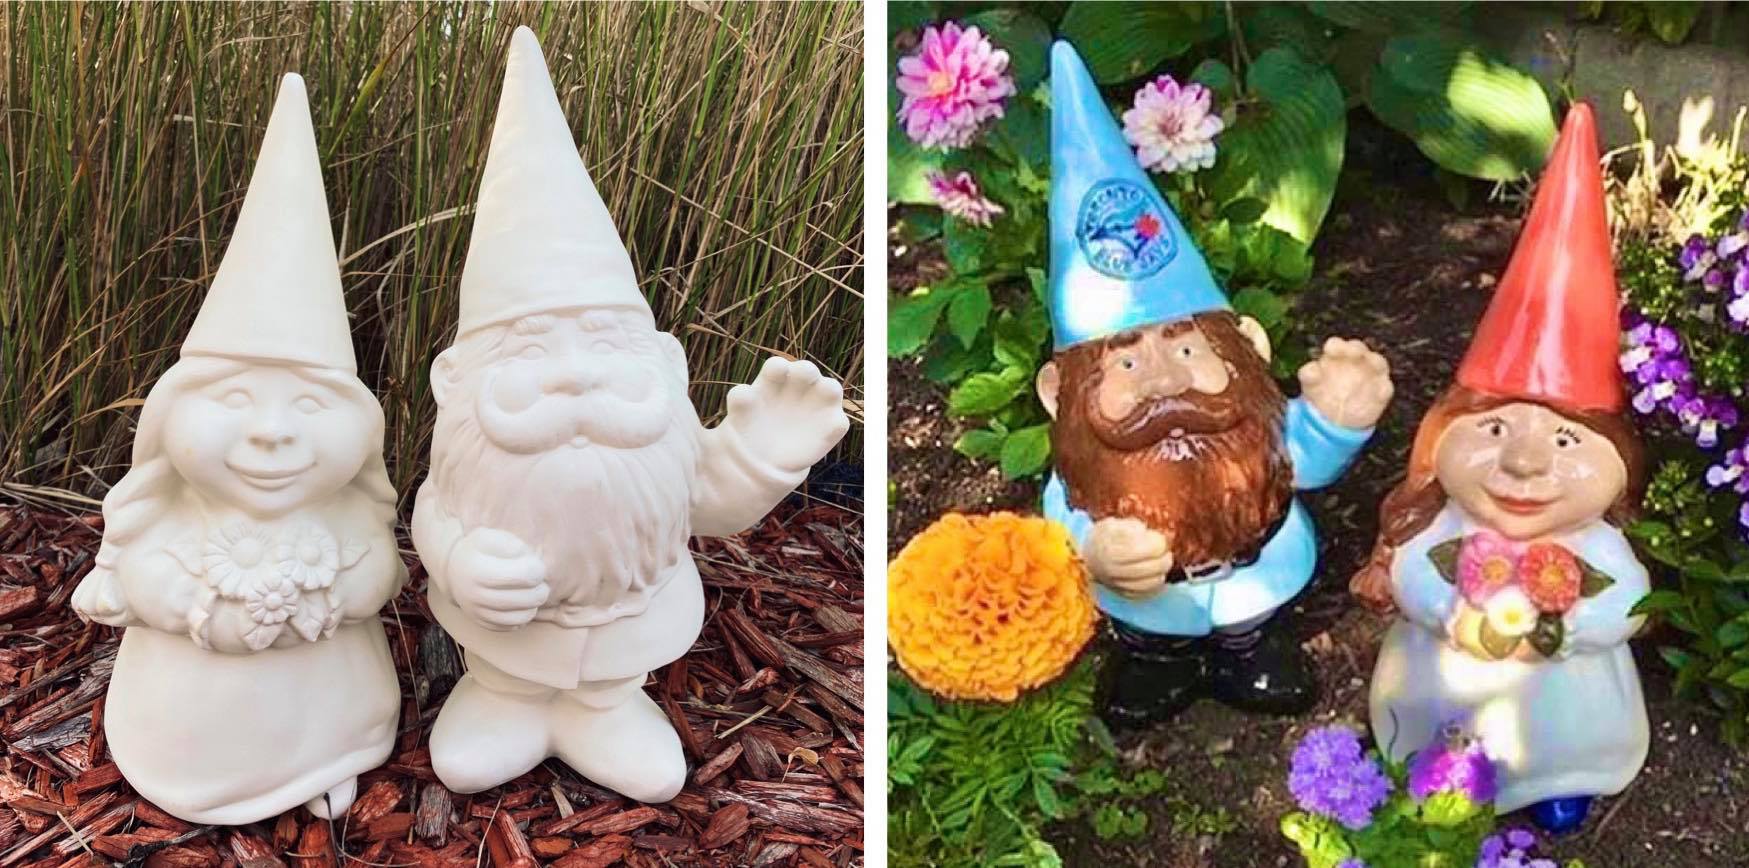 Plain and painted gnomes